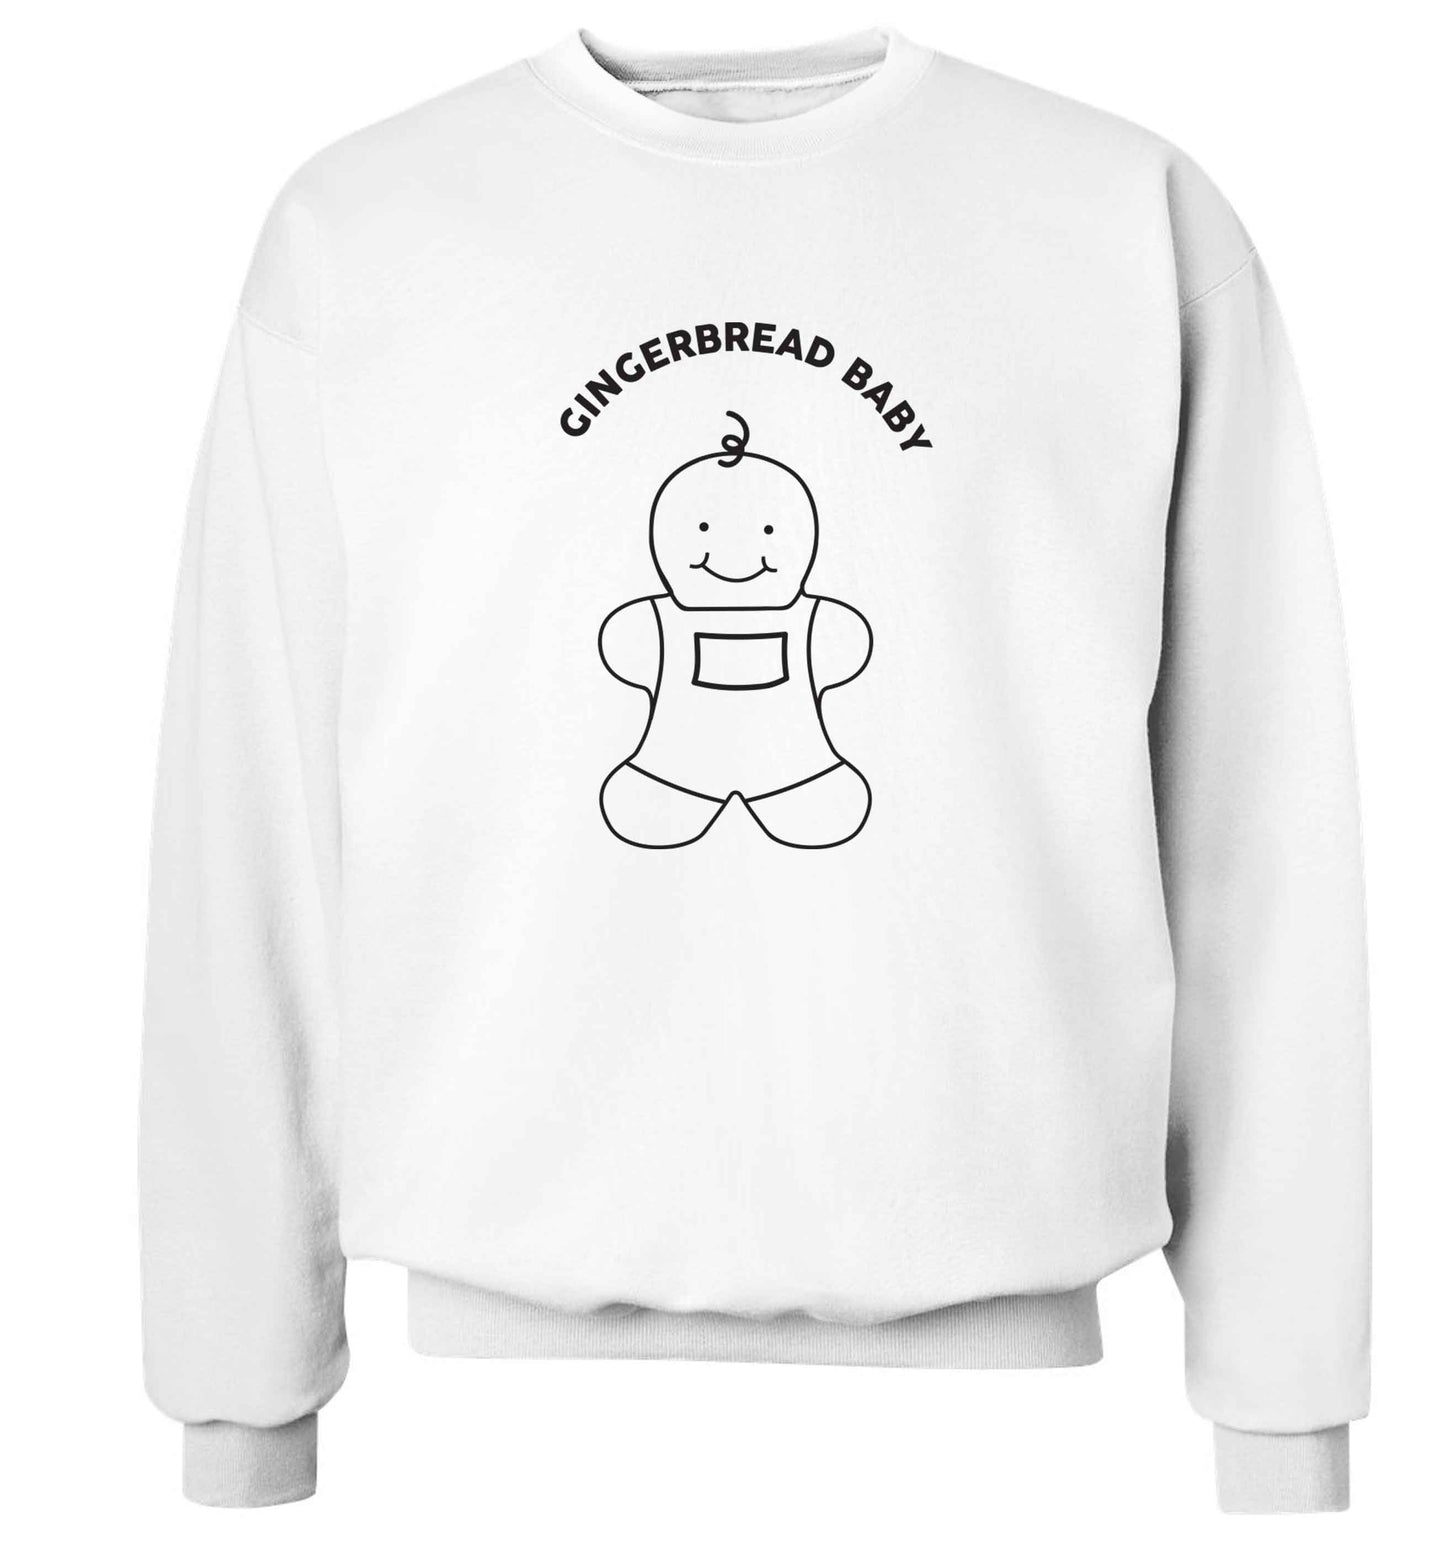 Gingerbread baby adult's unisex white sweater 2XL